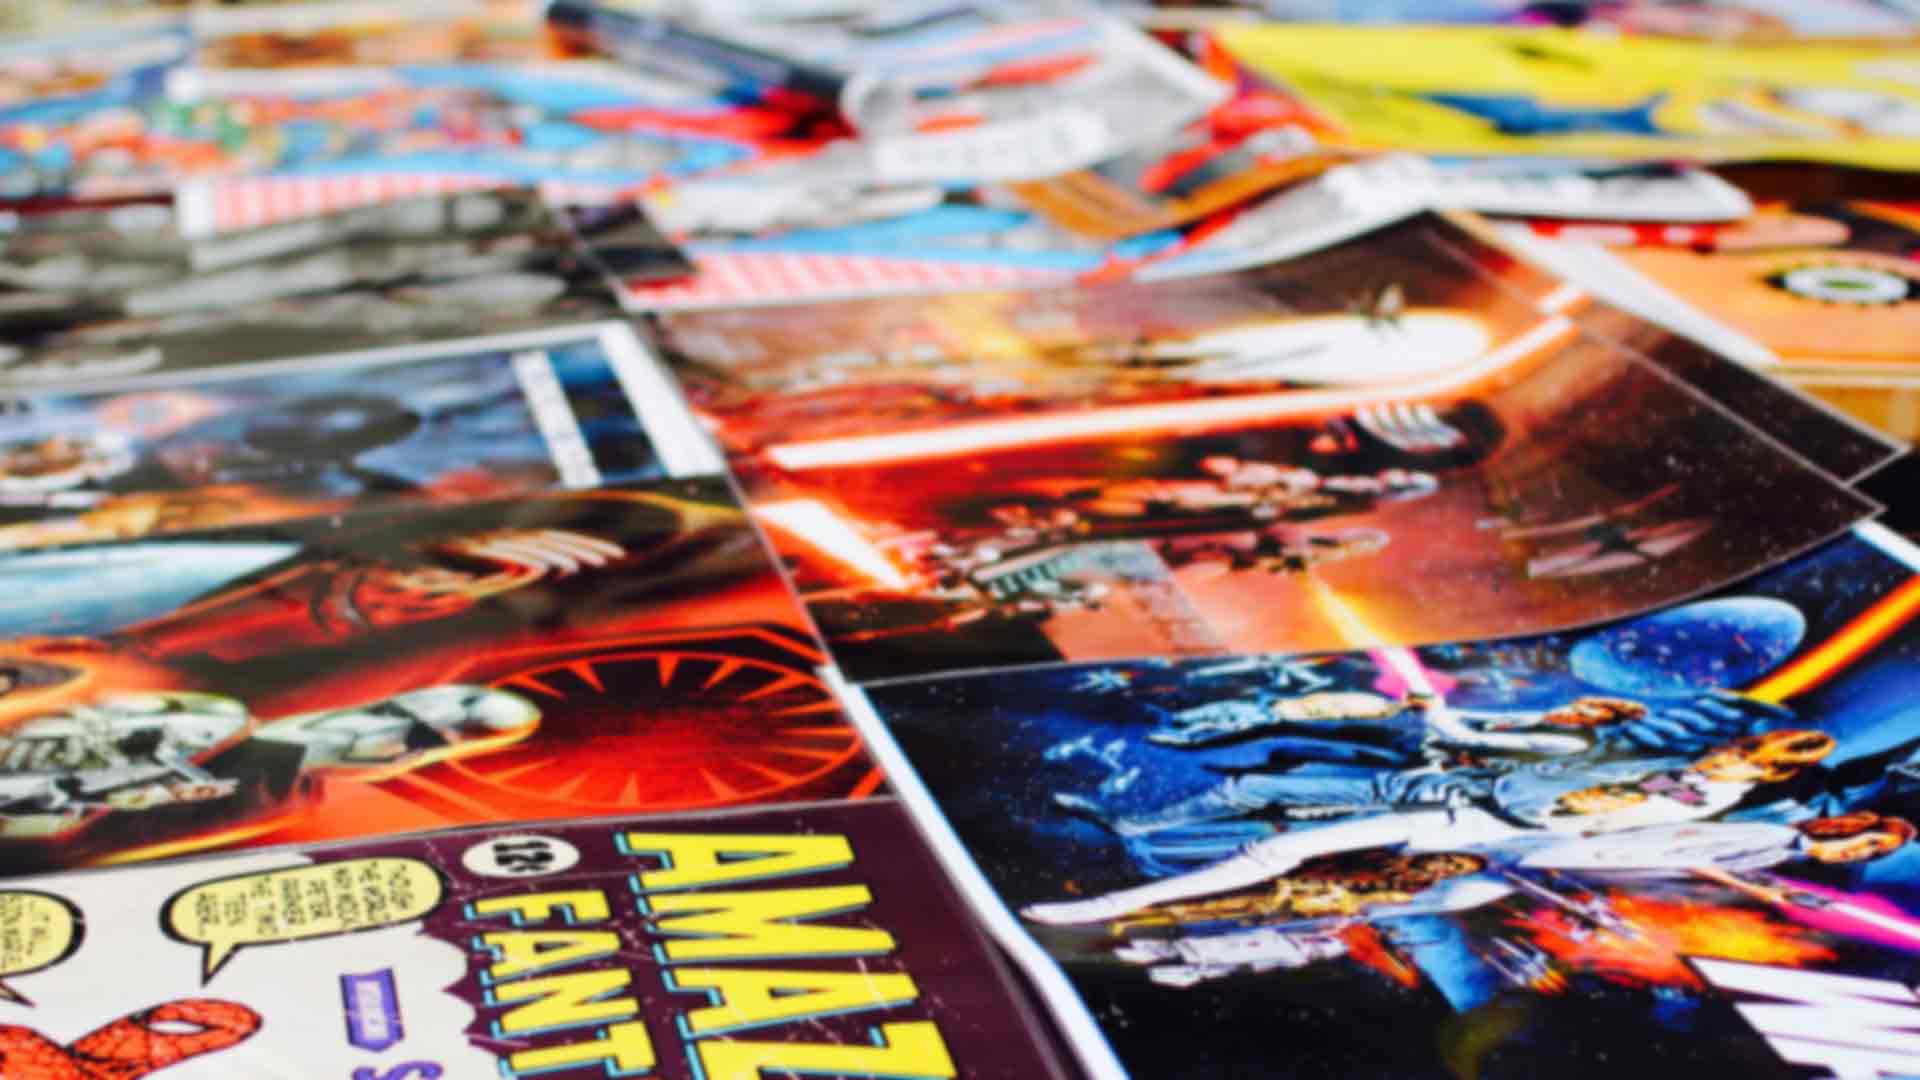 Books to Benefit Used Comic Book sale